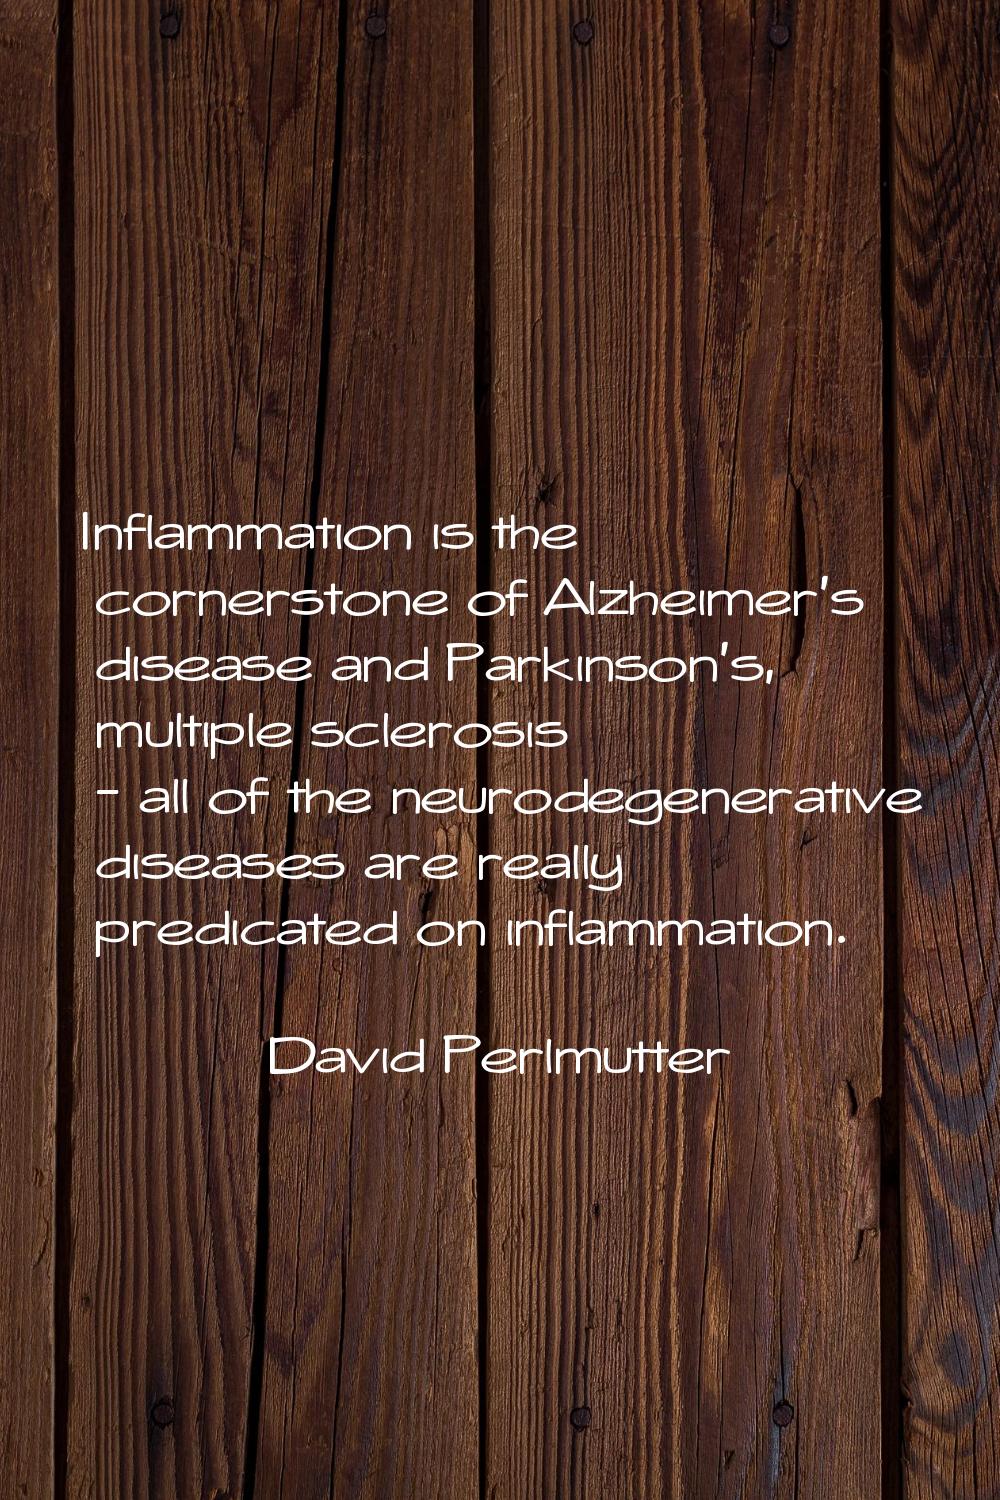 Inflammation is the cornerstone of Alzheimer's disease and Parkinson's, multiple sclerosis - all of